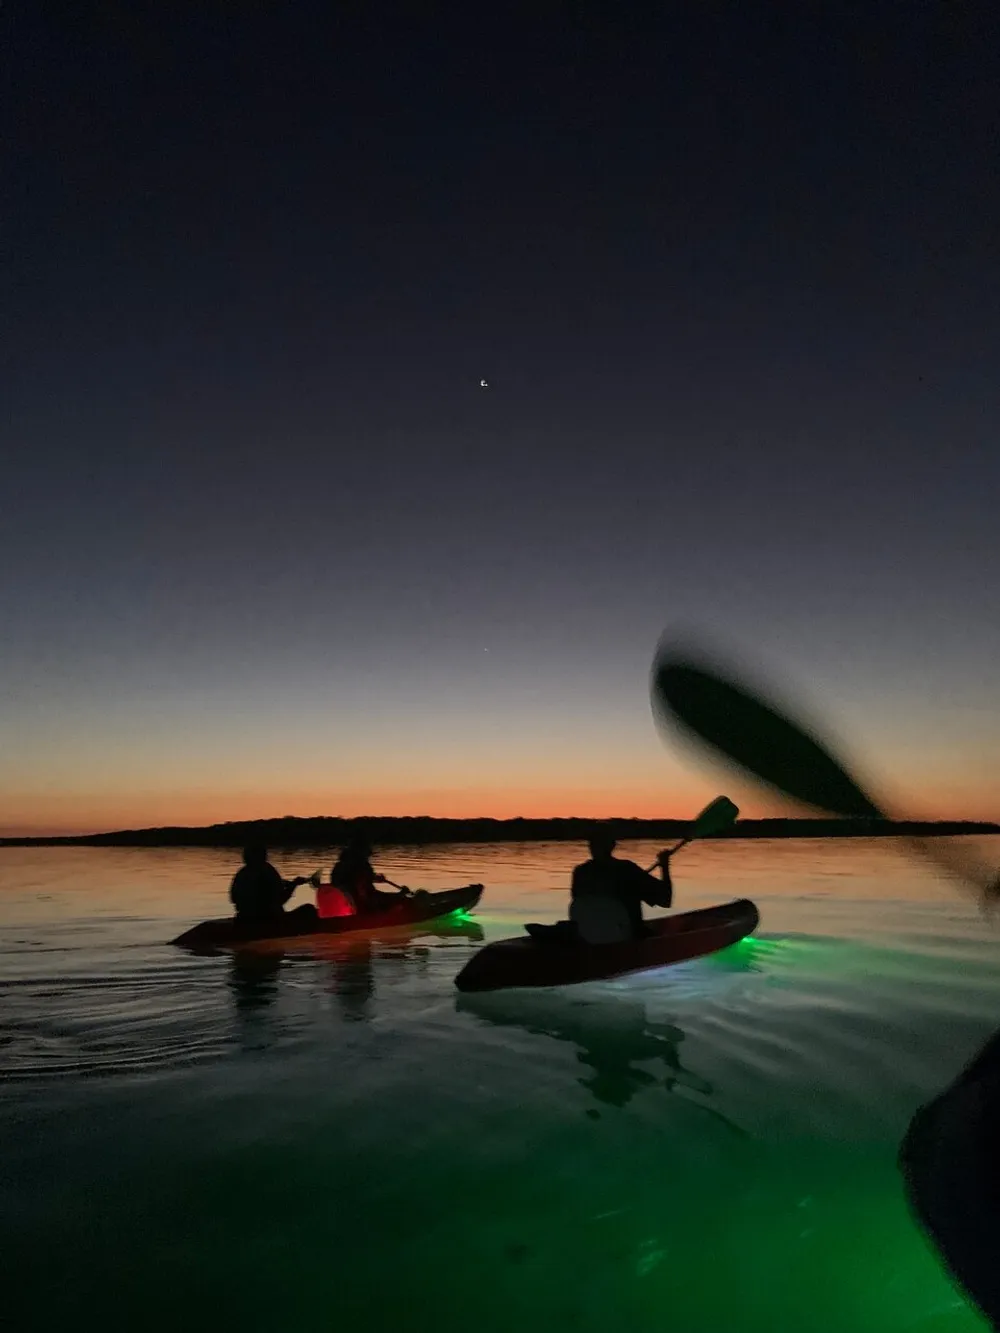 People are kayaking on calm waters against a vibrant sunset sky with a visible star above